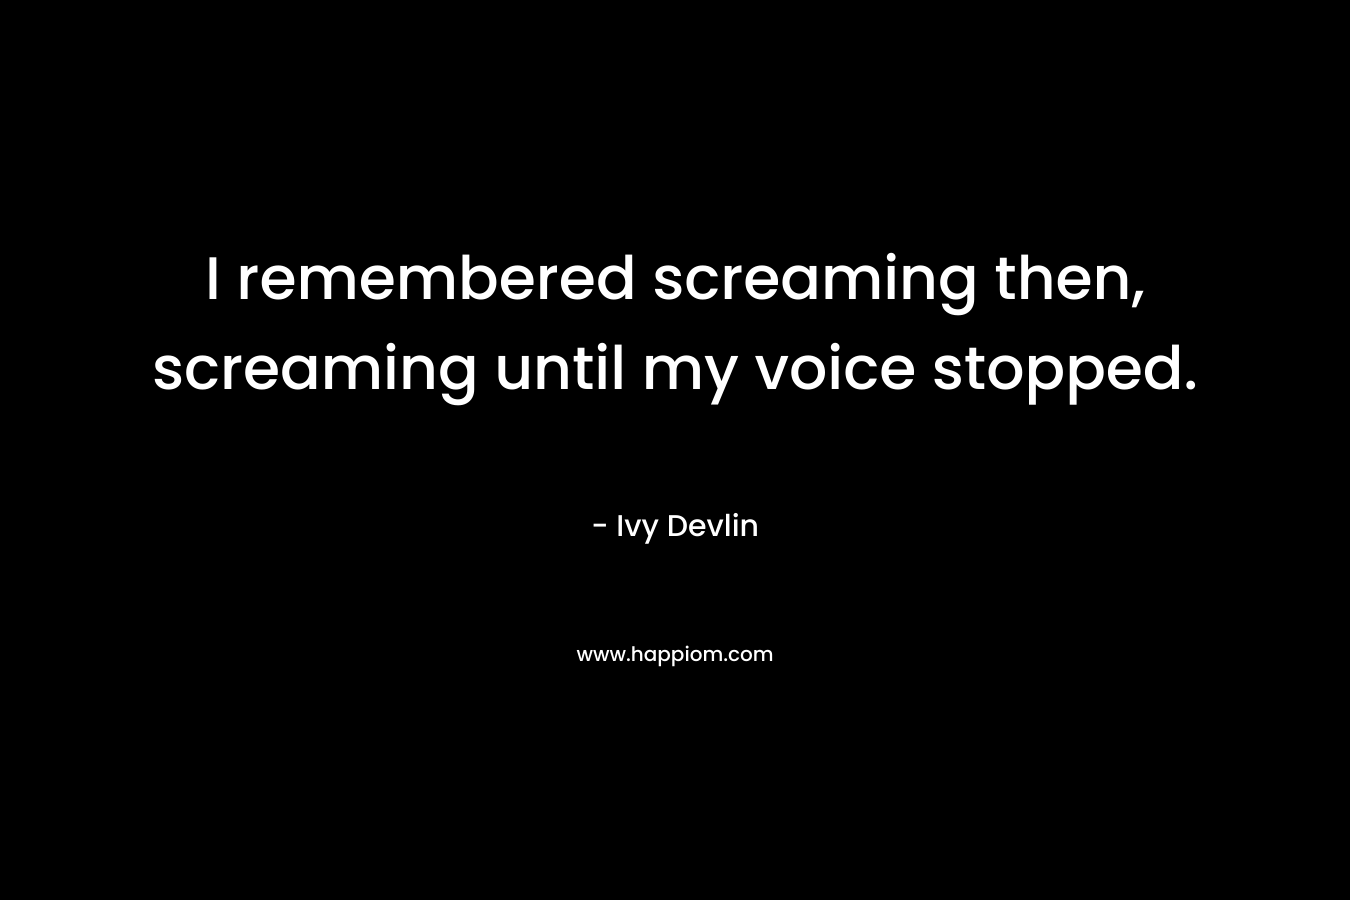 I remembered screaming then, screaming until my voice stopped. – Ivy Devlin